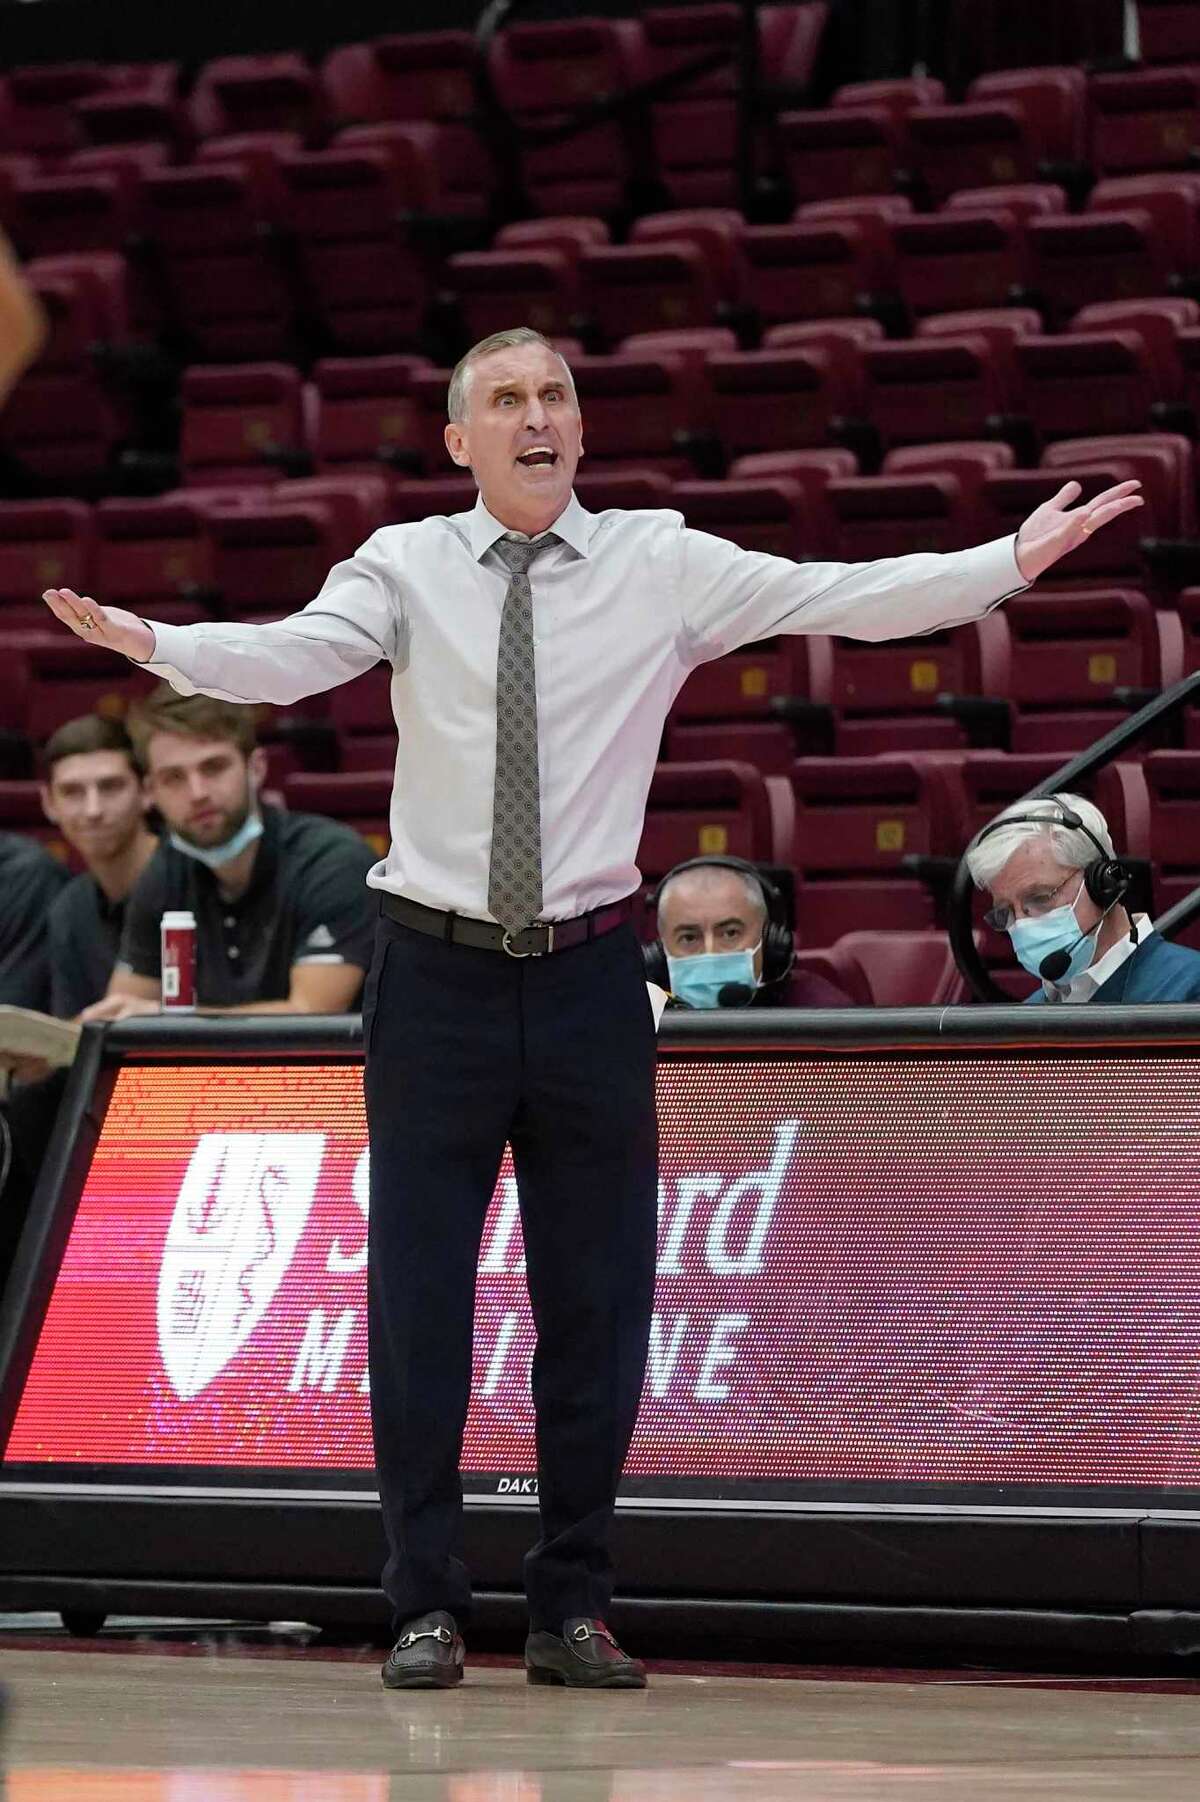 Arizona State head coach Bobby Hurley against Stanford during an NCAA college basketball game in Stanford, Calif., Saturday, Jan. 22, 2022. (AP Photo/Jeff Chiu)